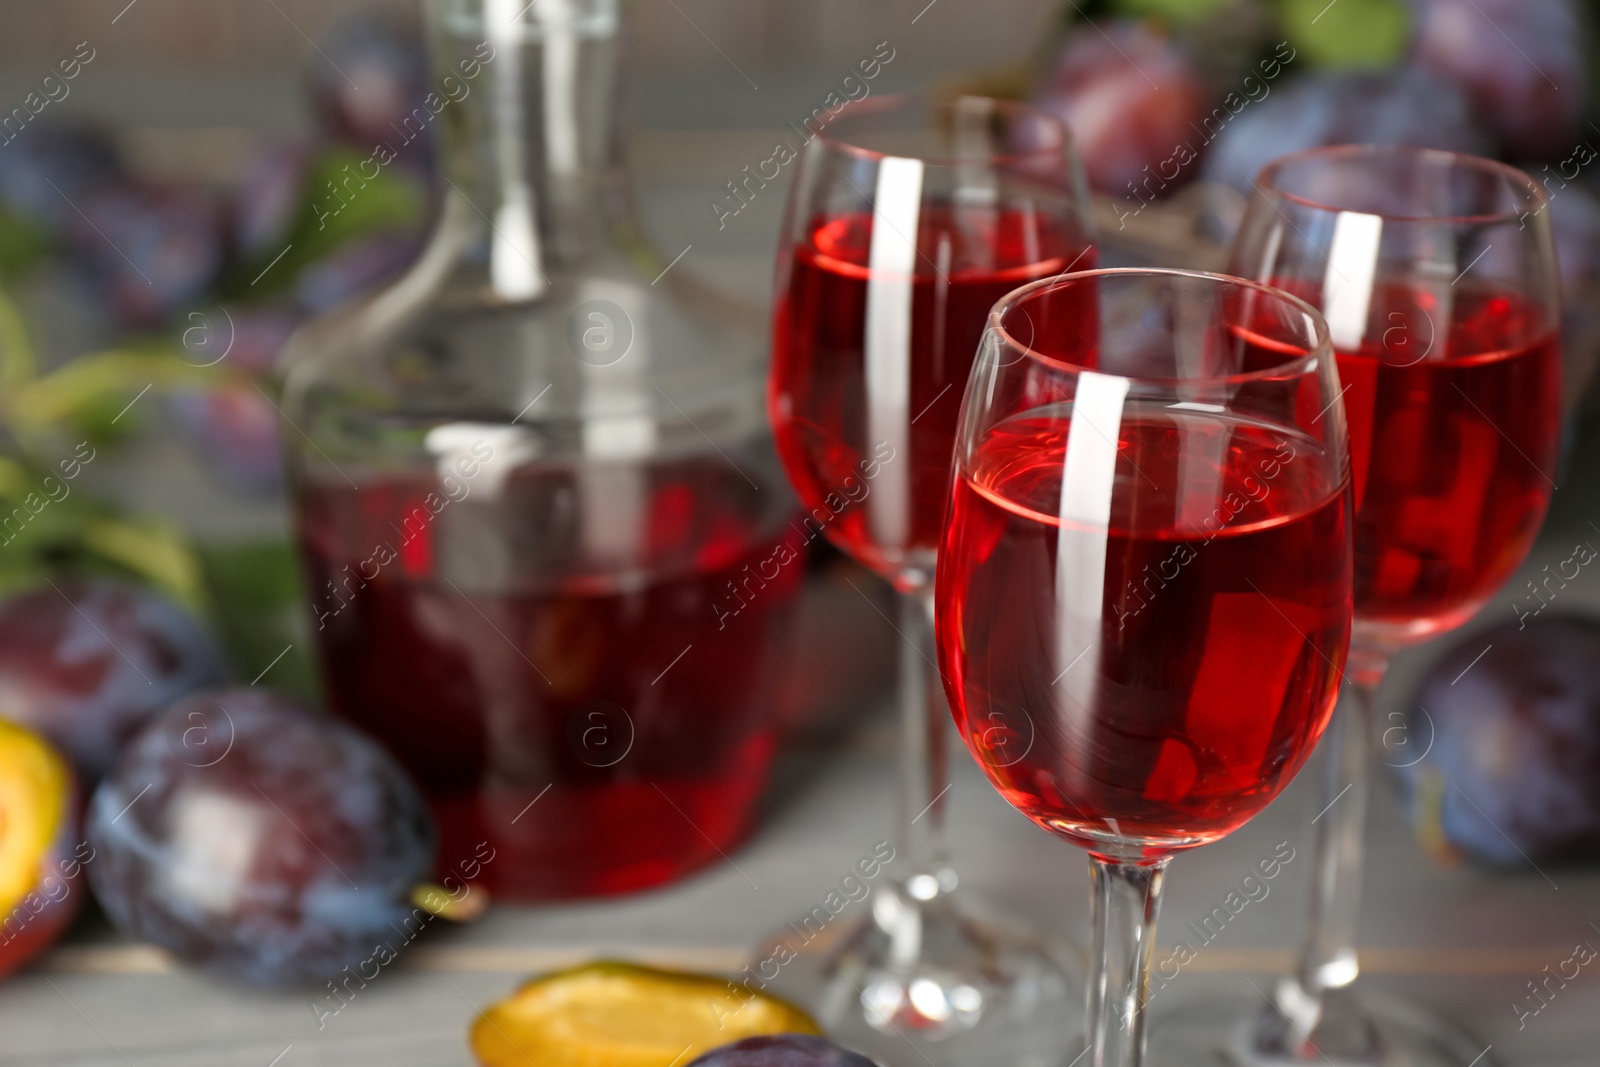 Photo of Delicious plum liquor and ripe fruits on table, closeup. Homemade strong alcoholic beverage